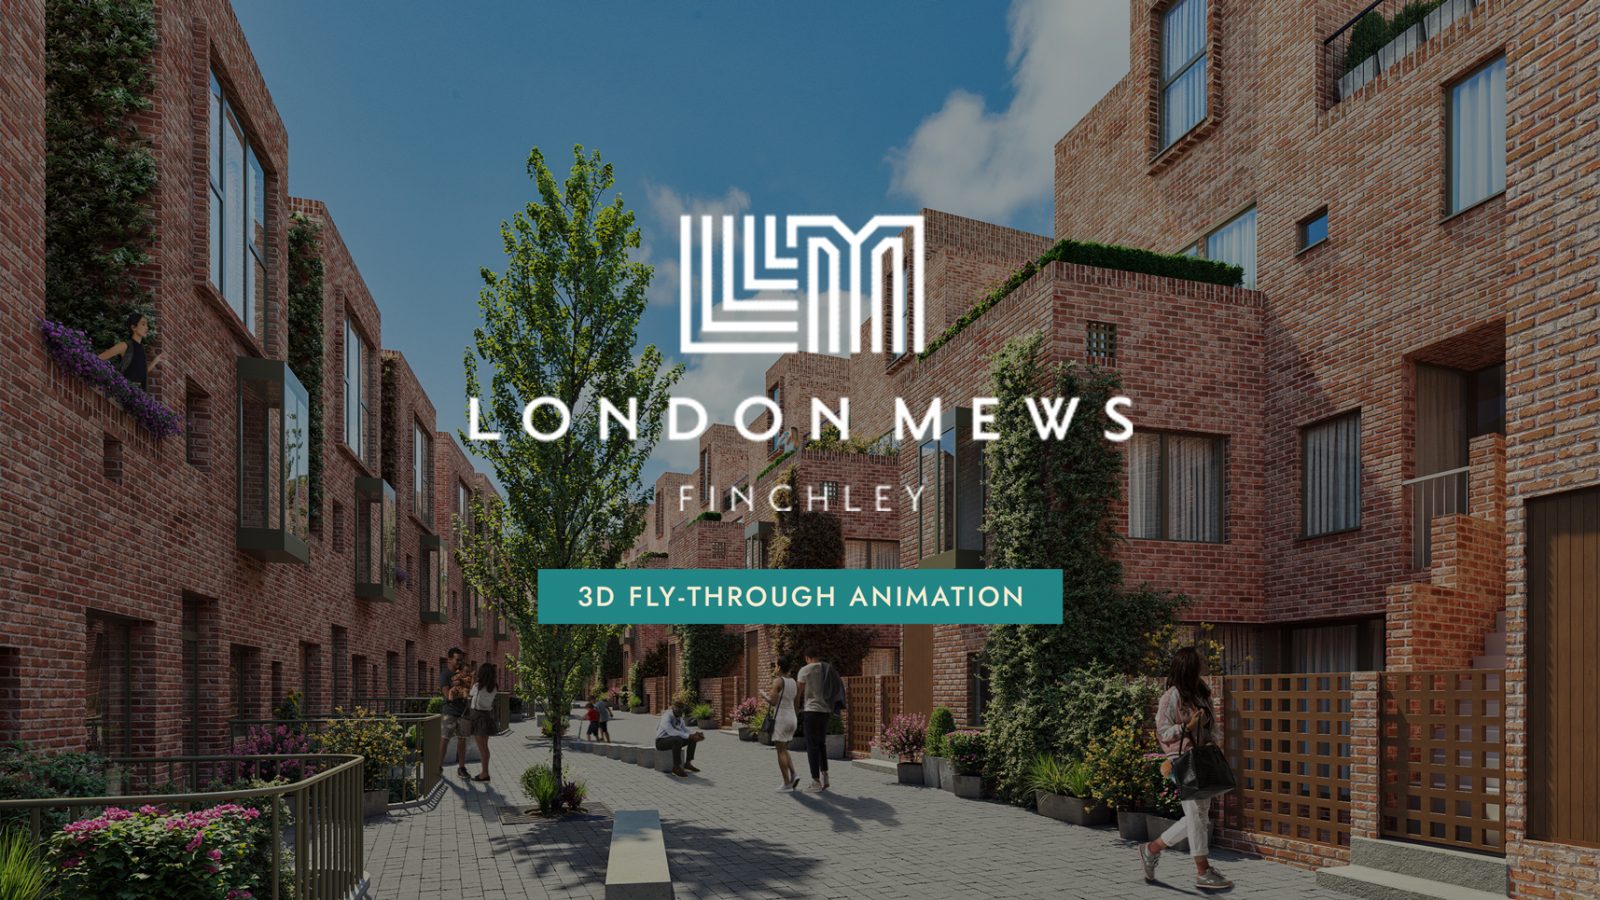 The London Mews Finchley 3D Animation 2